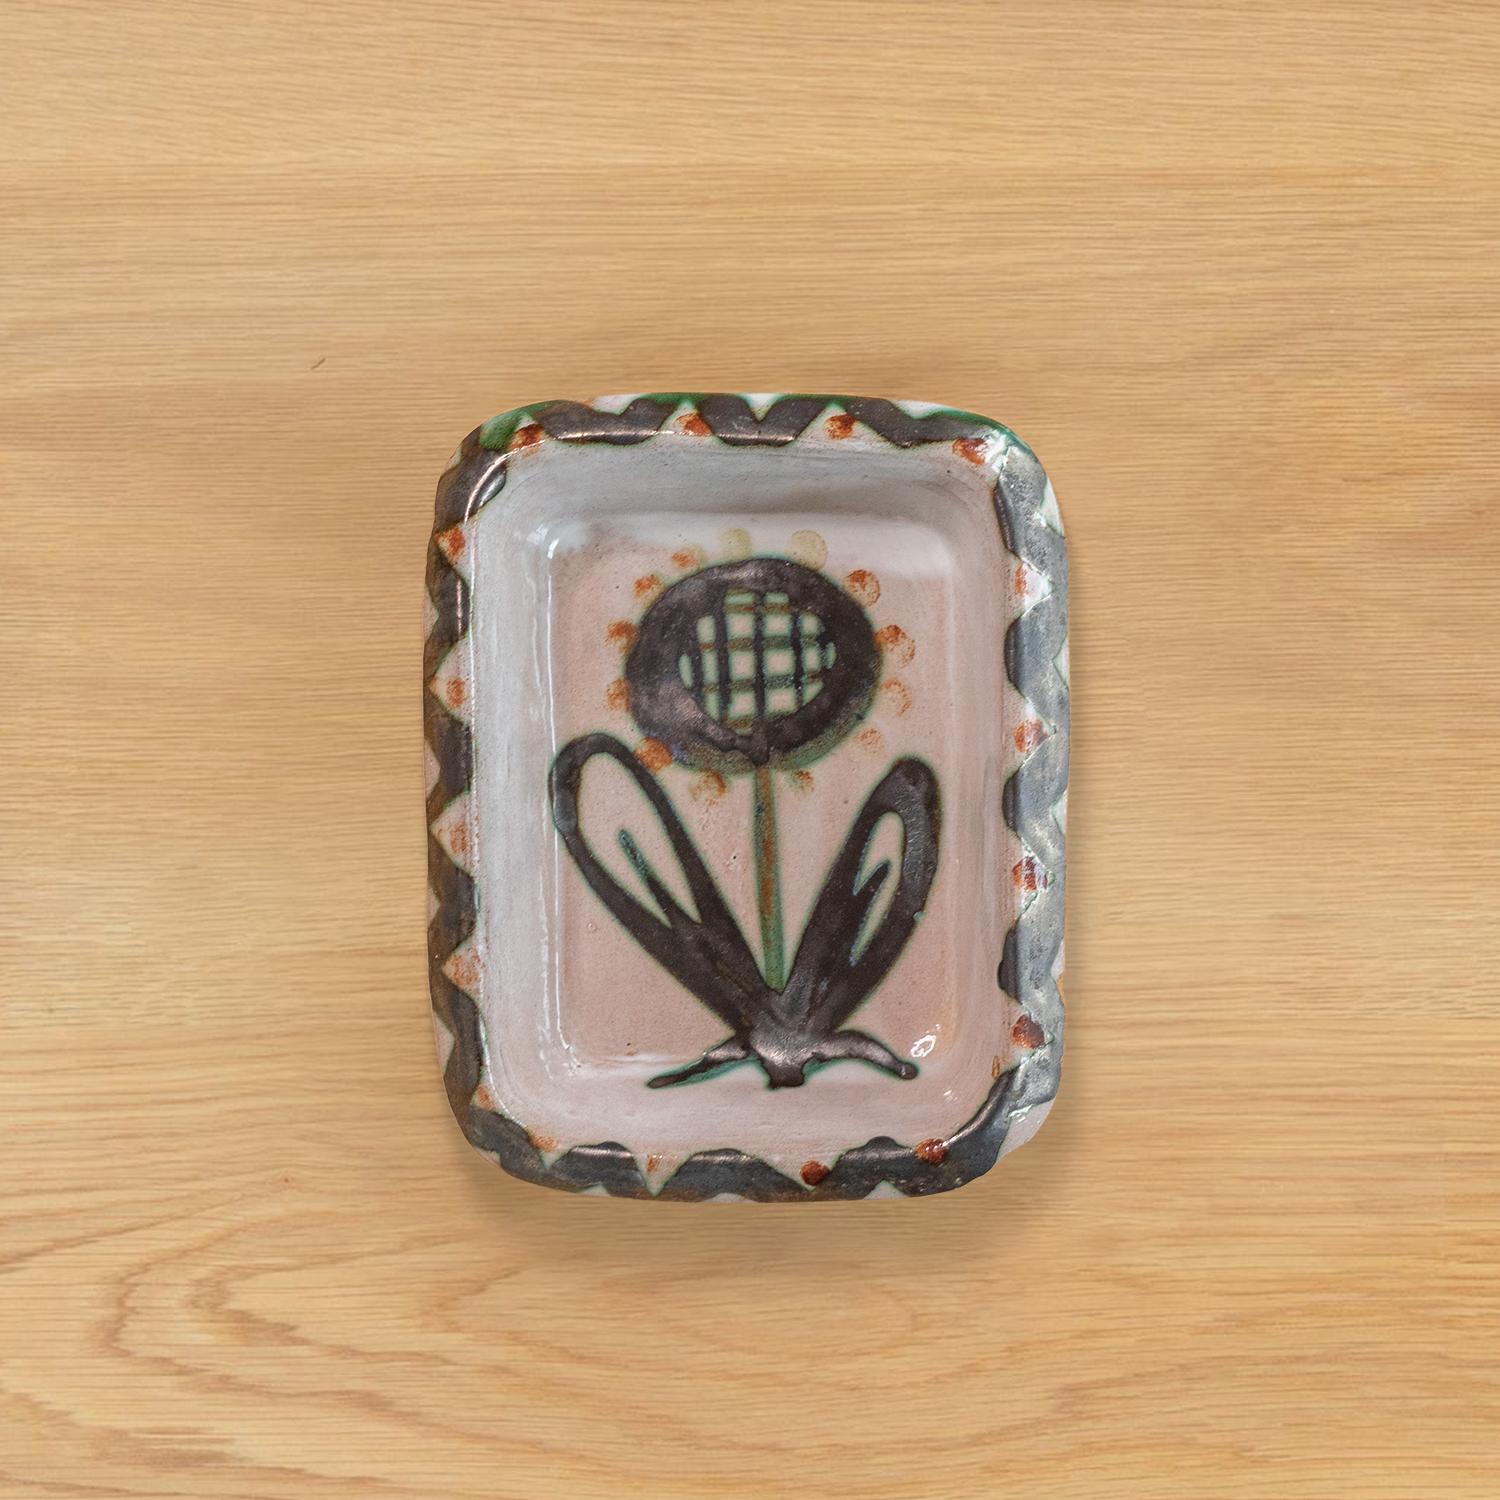 Beautiful painted ceramic dish by Robert Picault, France, 1950s. Rectangular dish with painted flower and green zig zag edge. Perfect as a catch-all or jewelry tray. Signed.